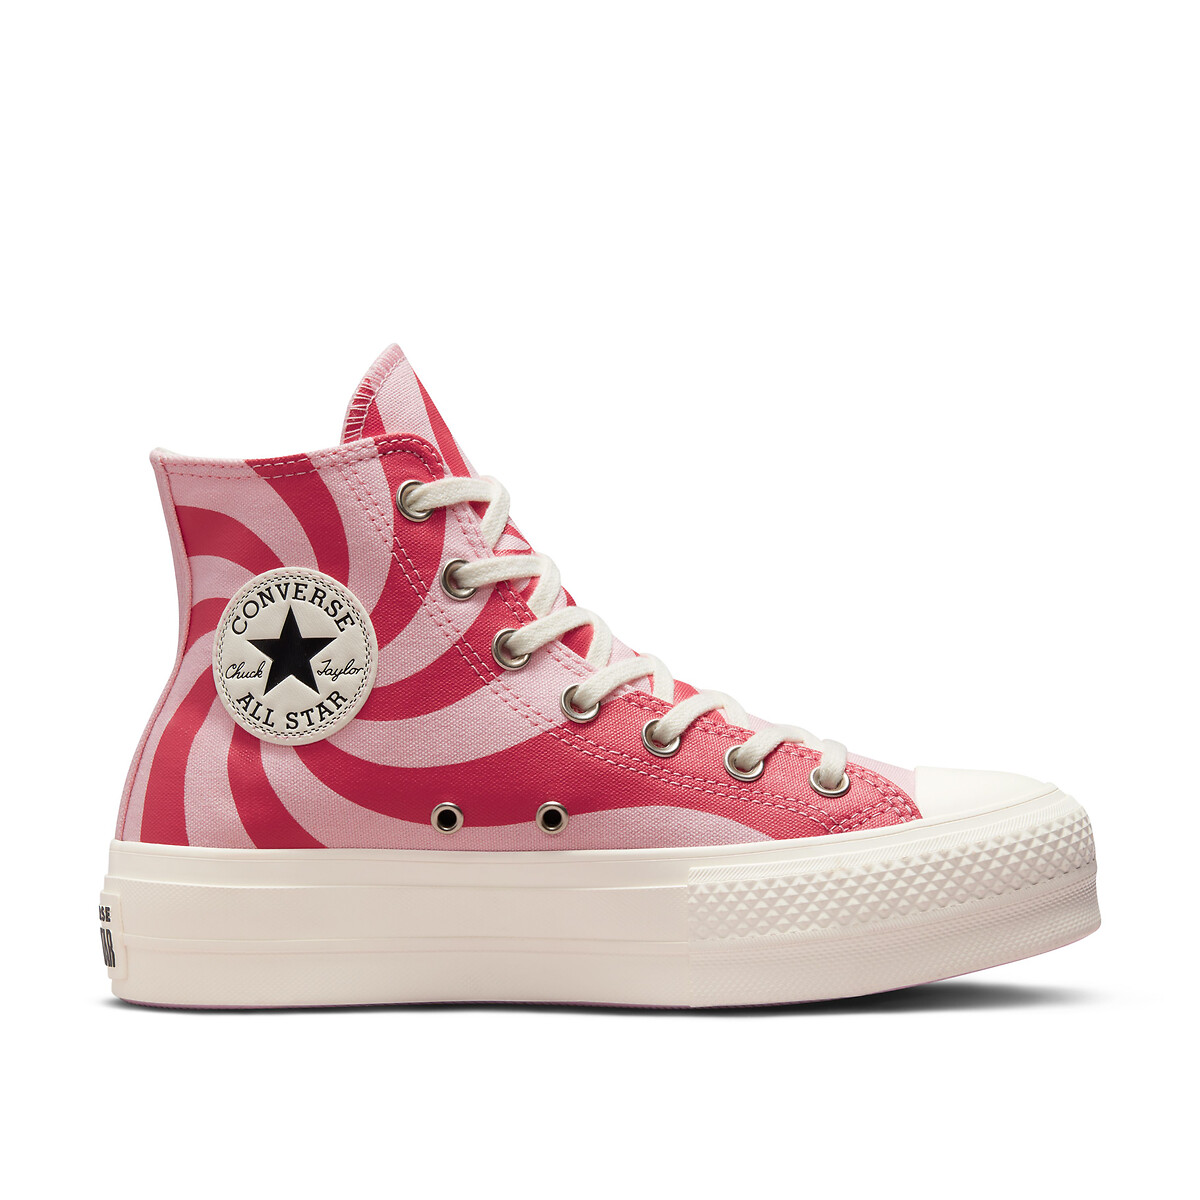 Chuck taylor lift hi colour candy canvas high top trainers, pink, Converse La Redoute